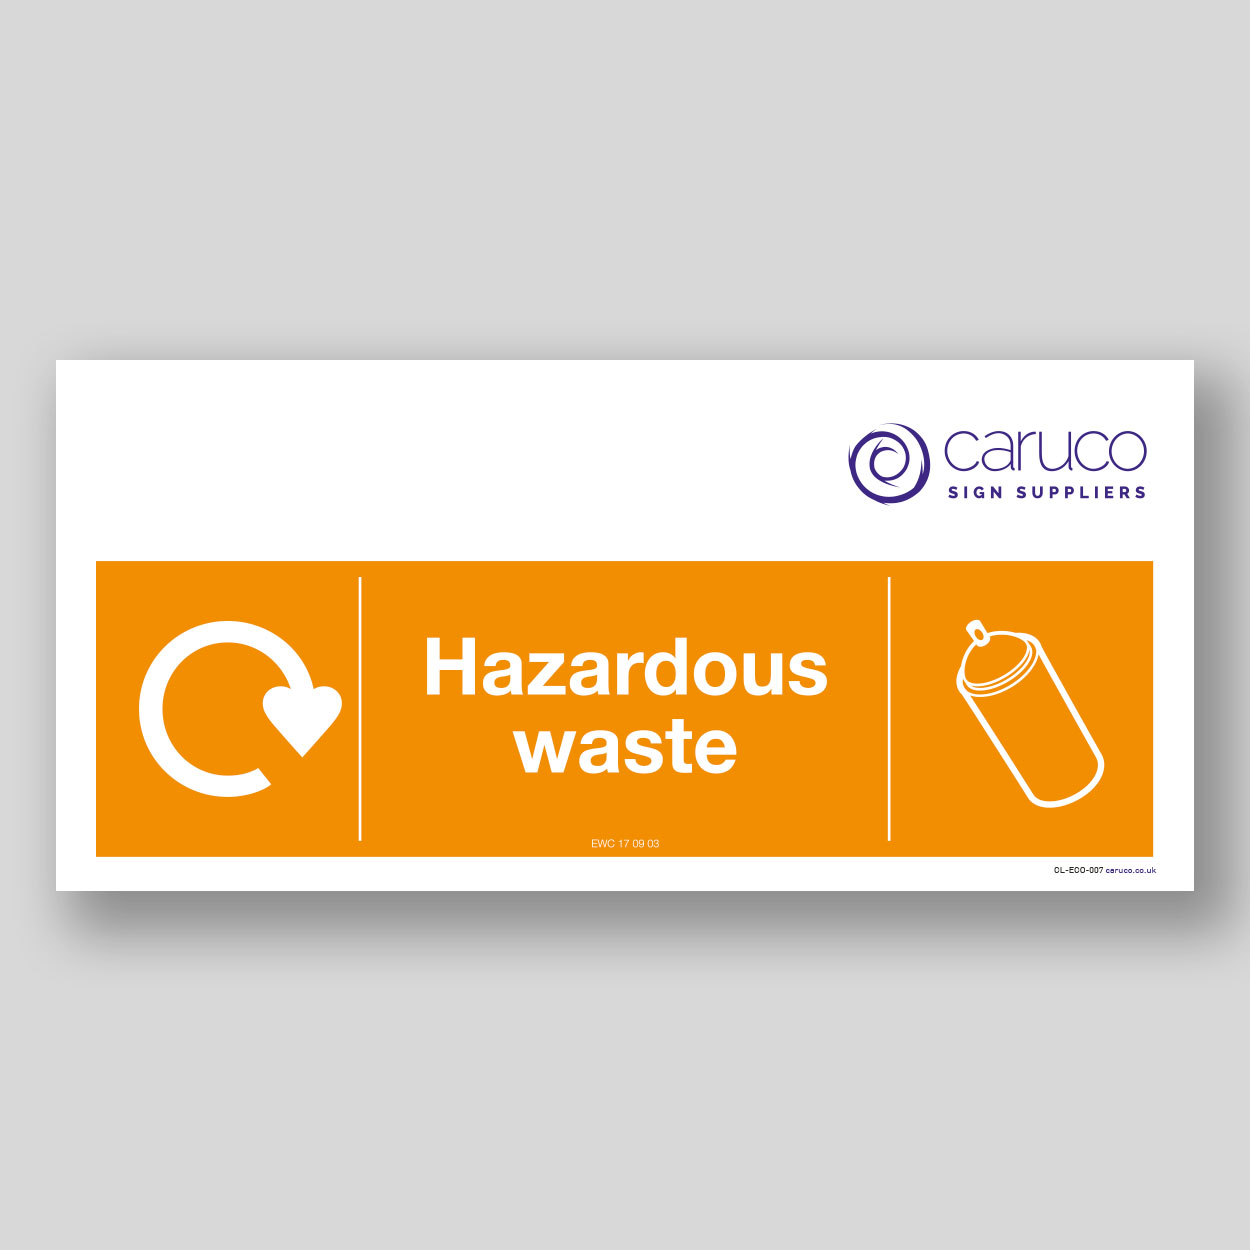 CL-ECO-007 Recycle hazadous waste